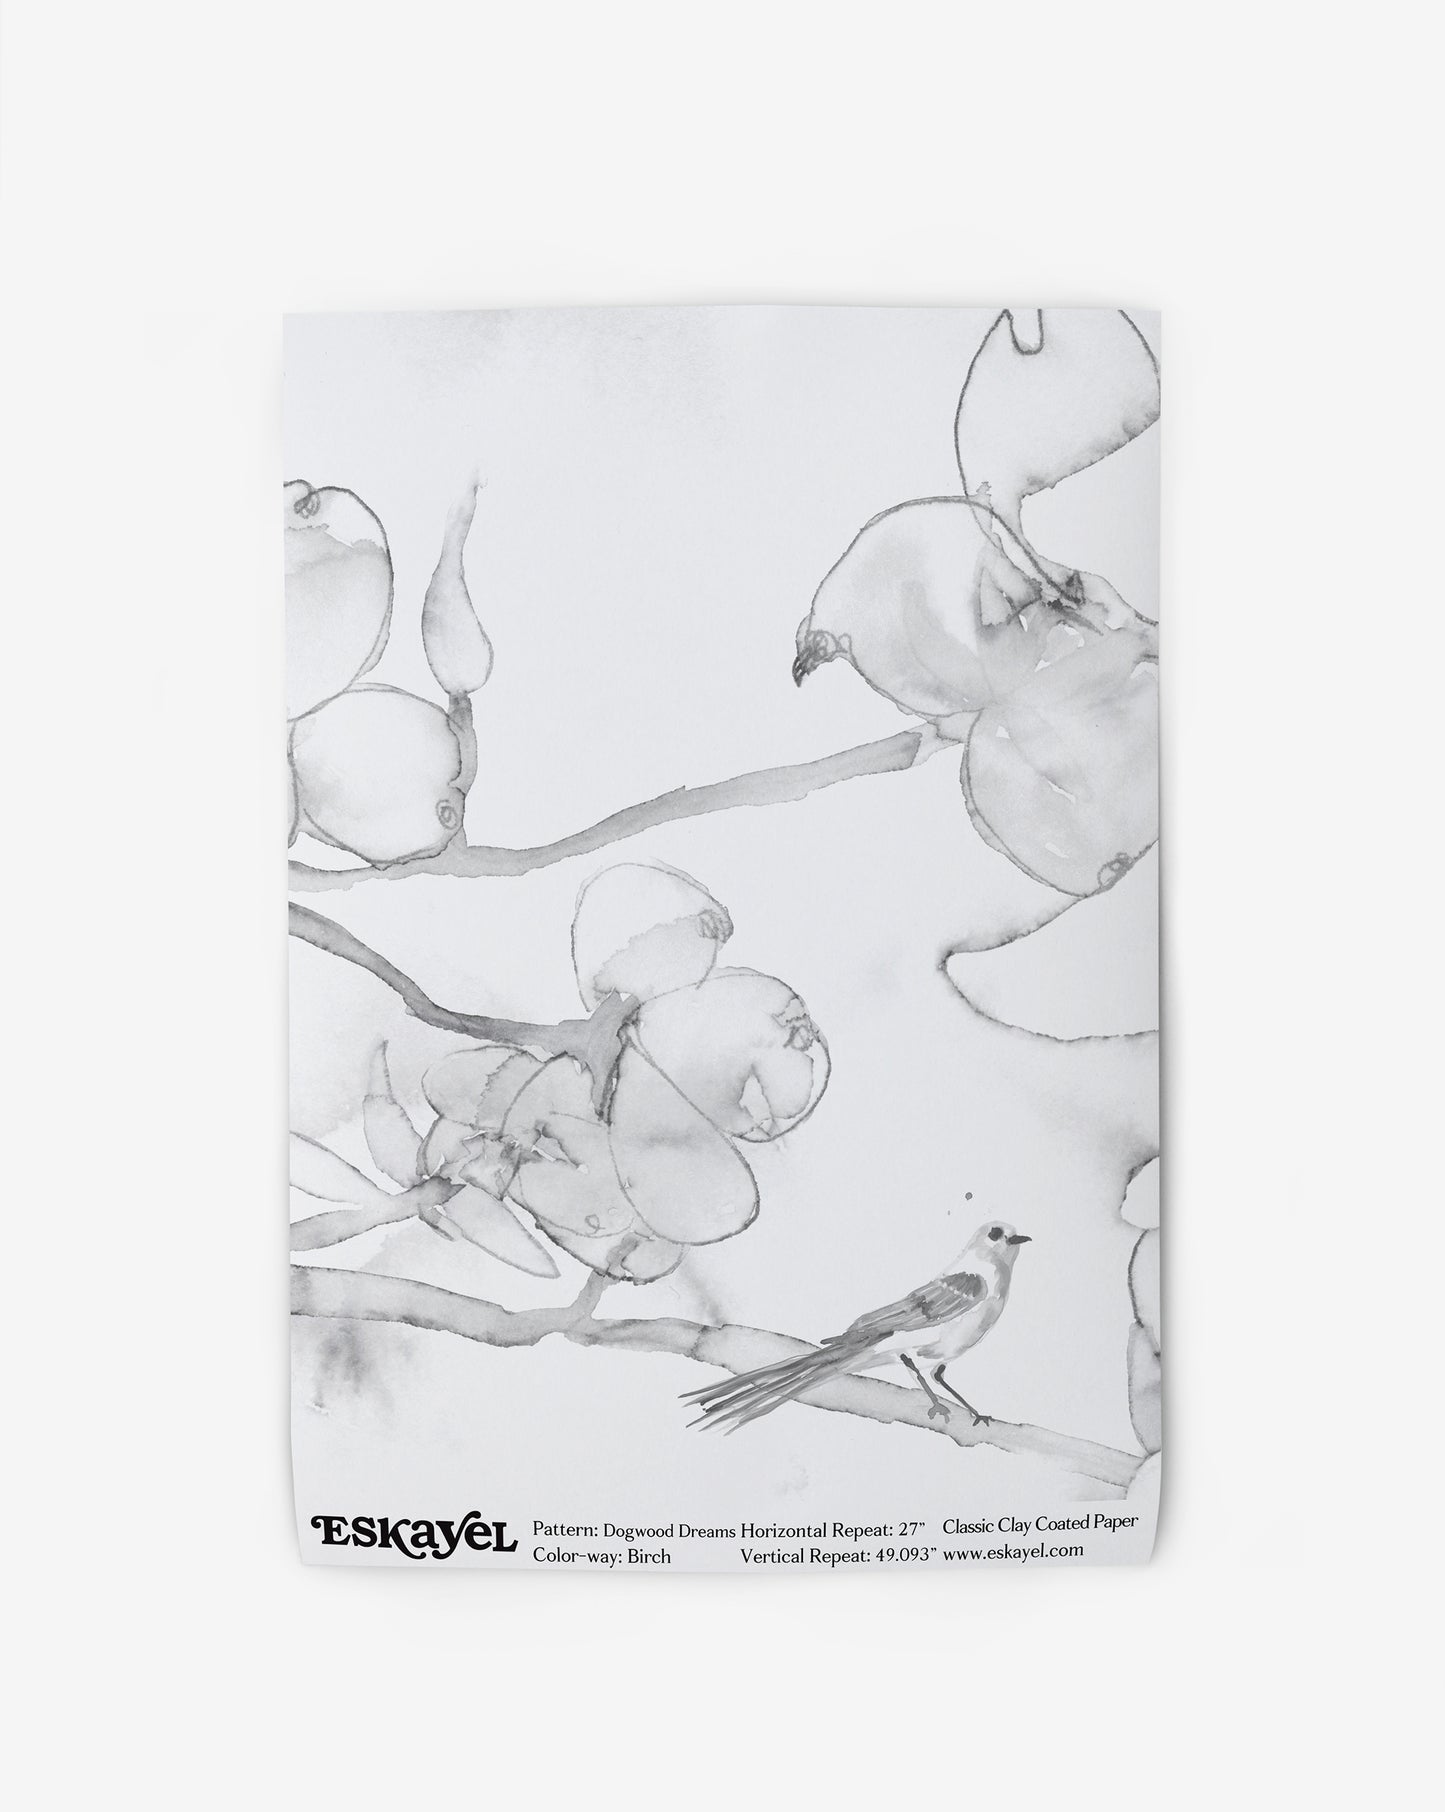 A black and white drawing of a bird on a branch with Dogwood Dreams Wallpaper Birch design